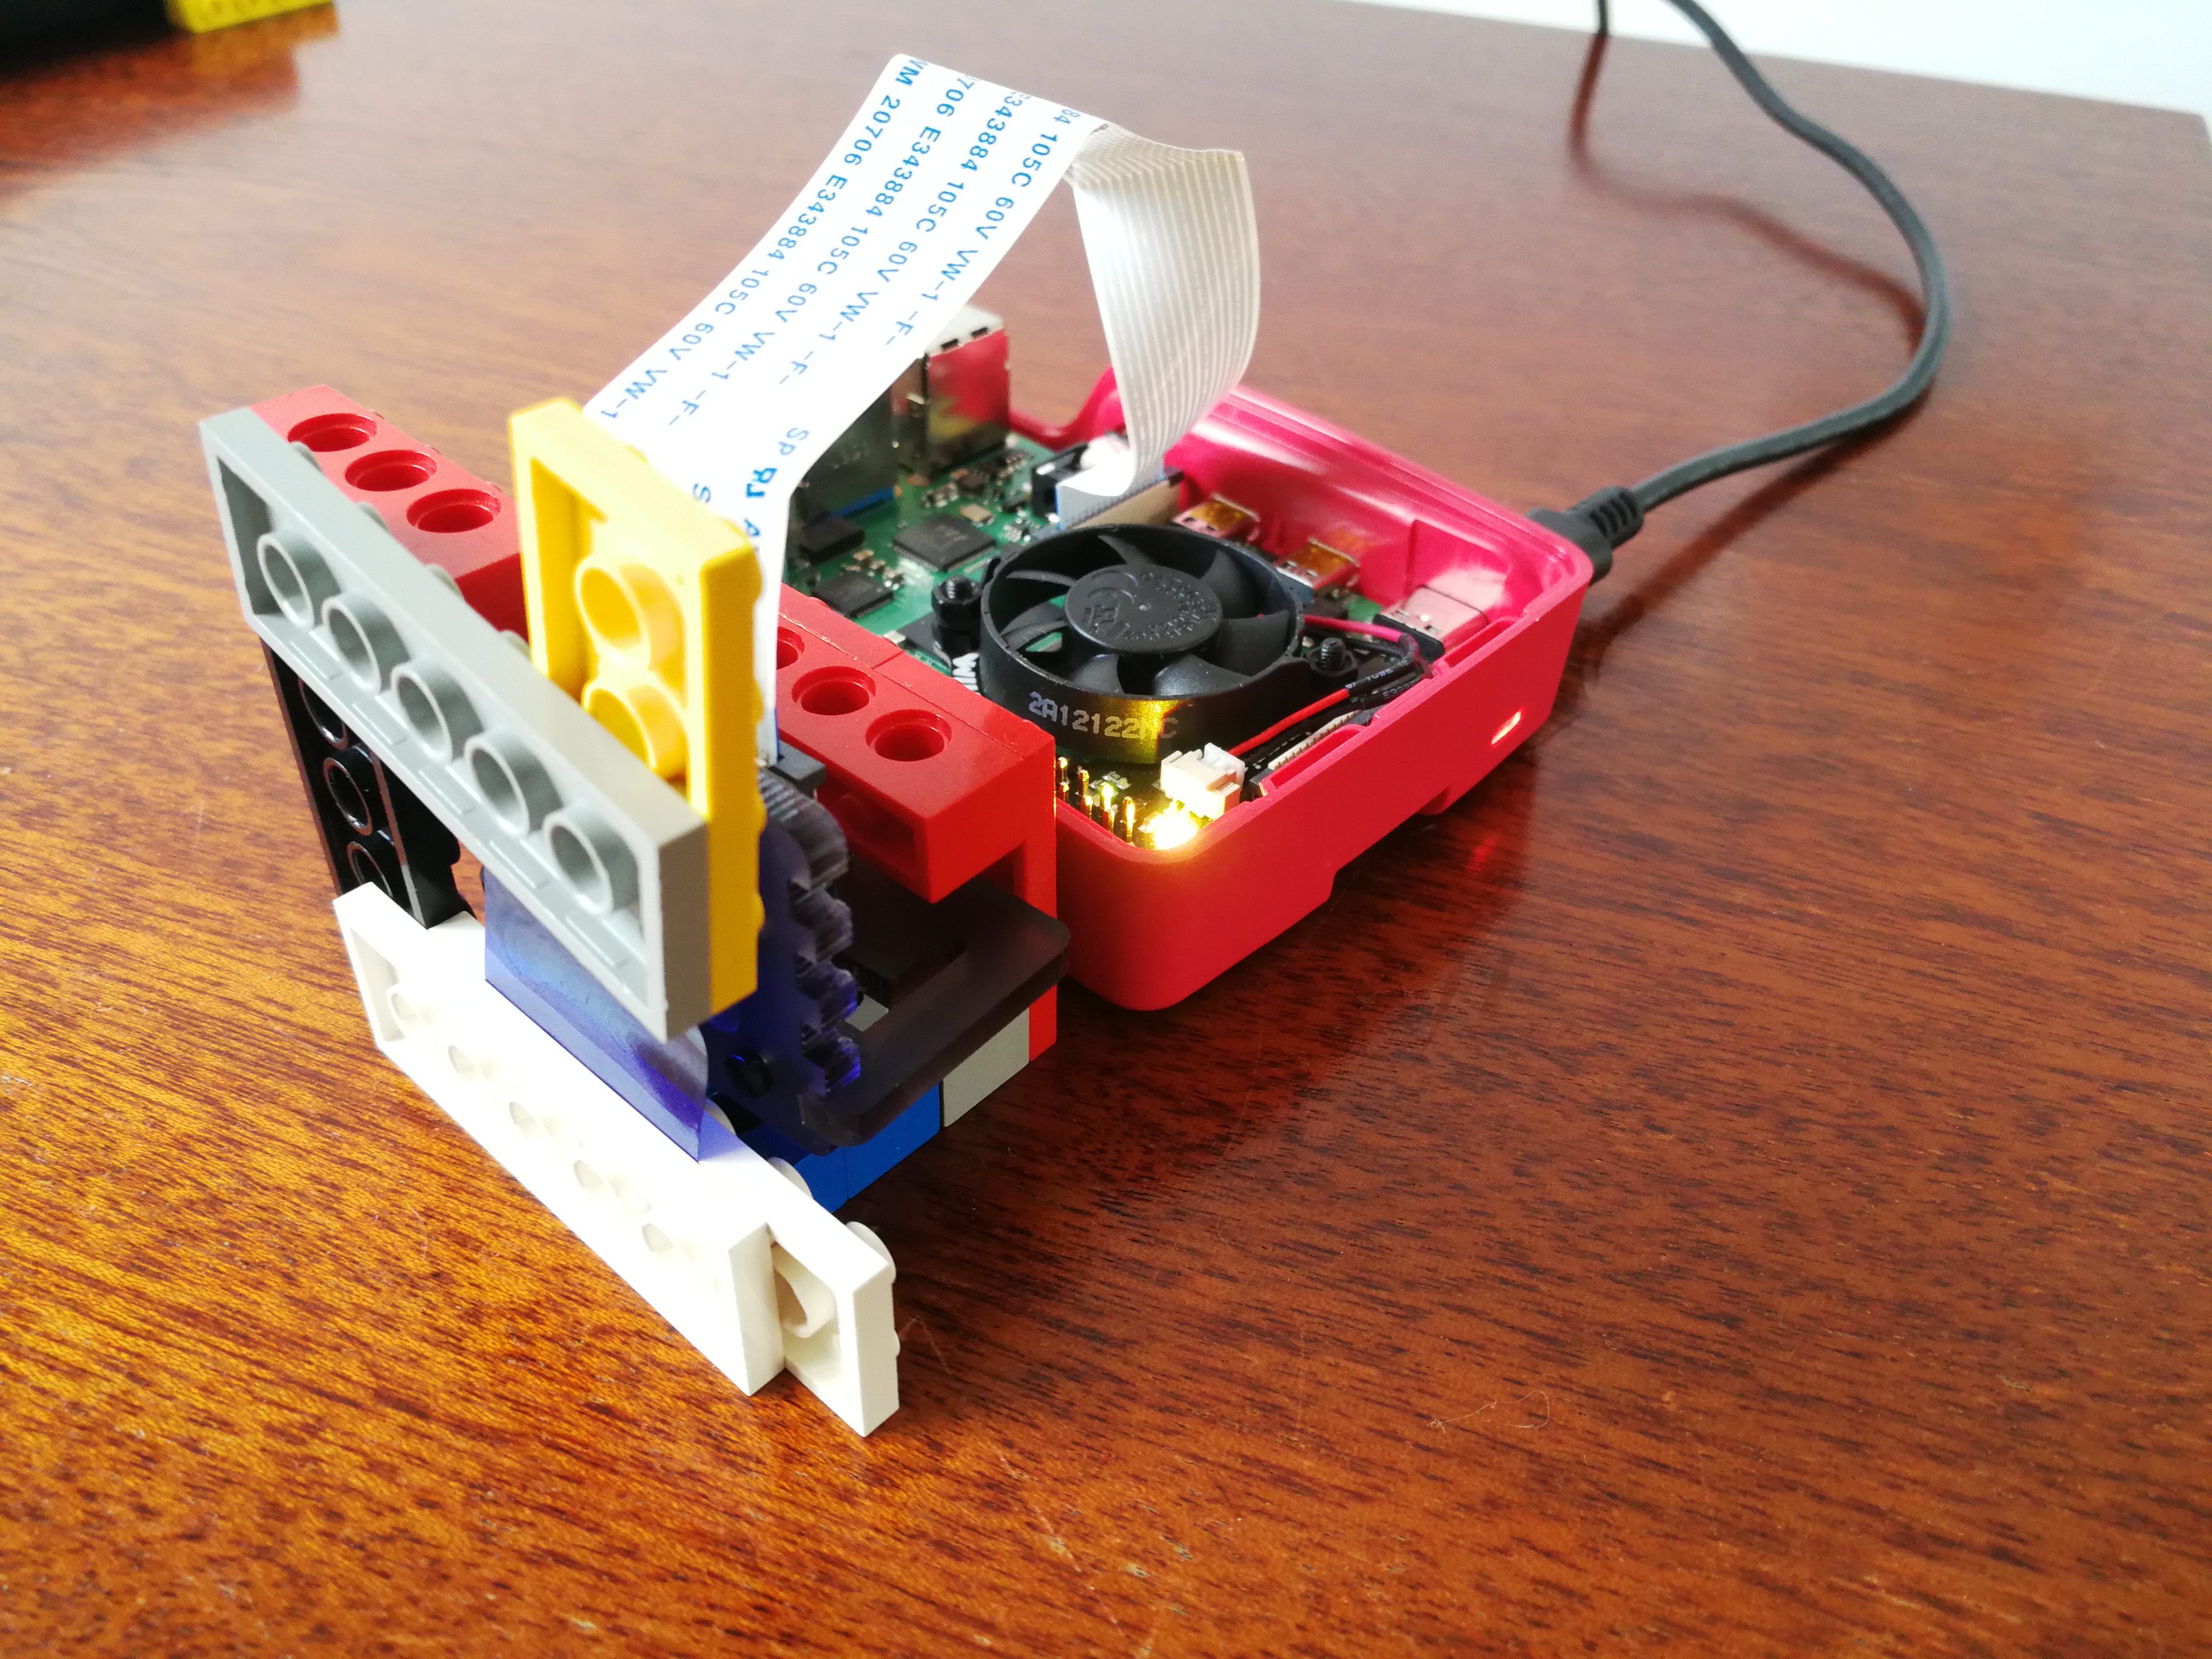 Raspberry Pi 4 with camera in makeshift lego stand.